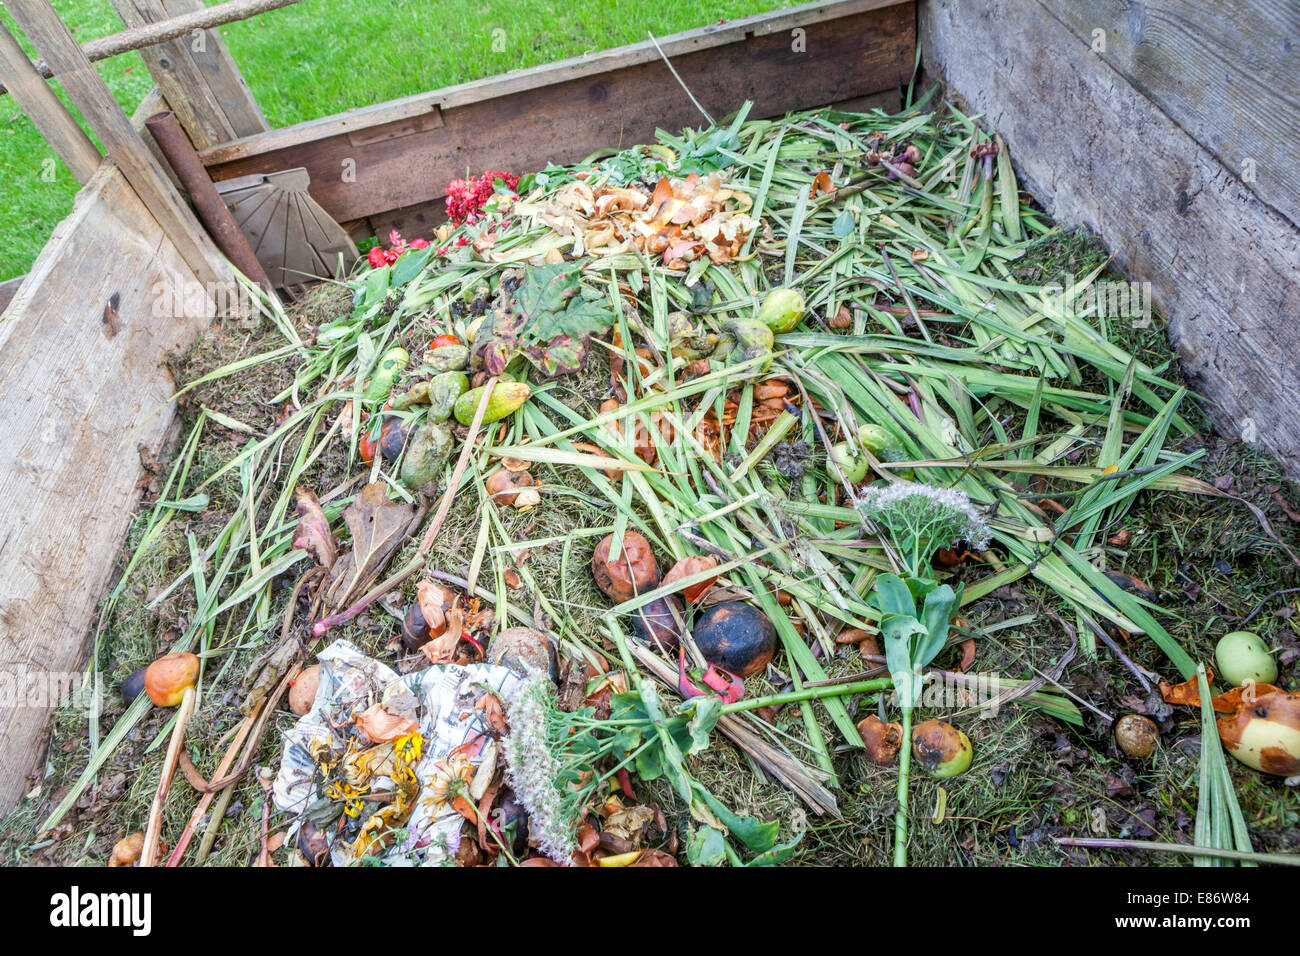 Garden compost heap in wooden composter, composting waste Stock Photo